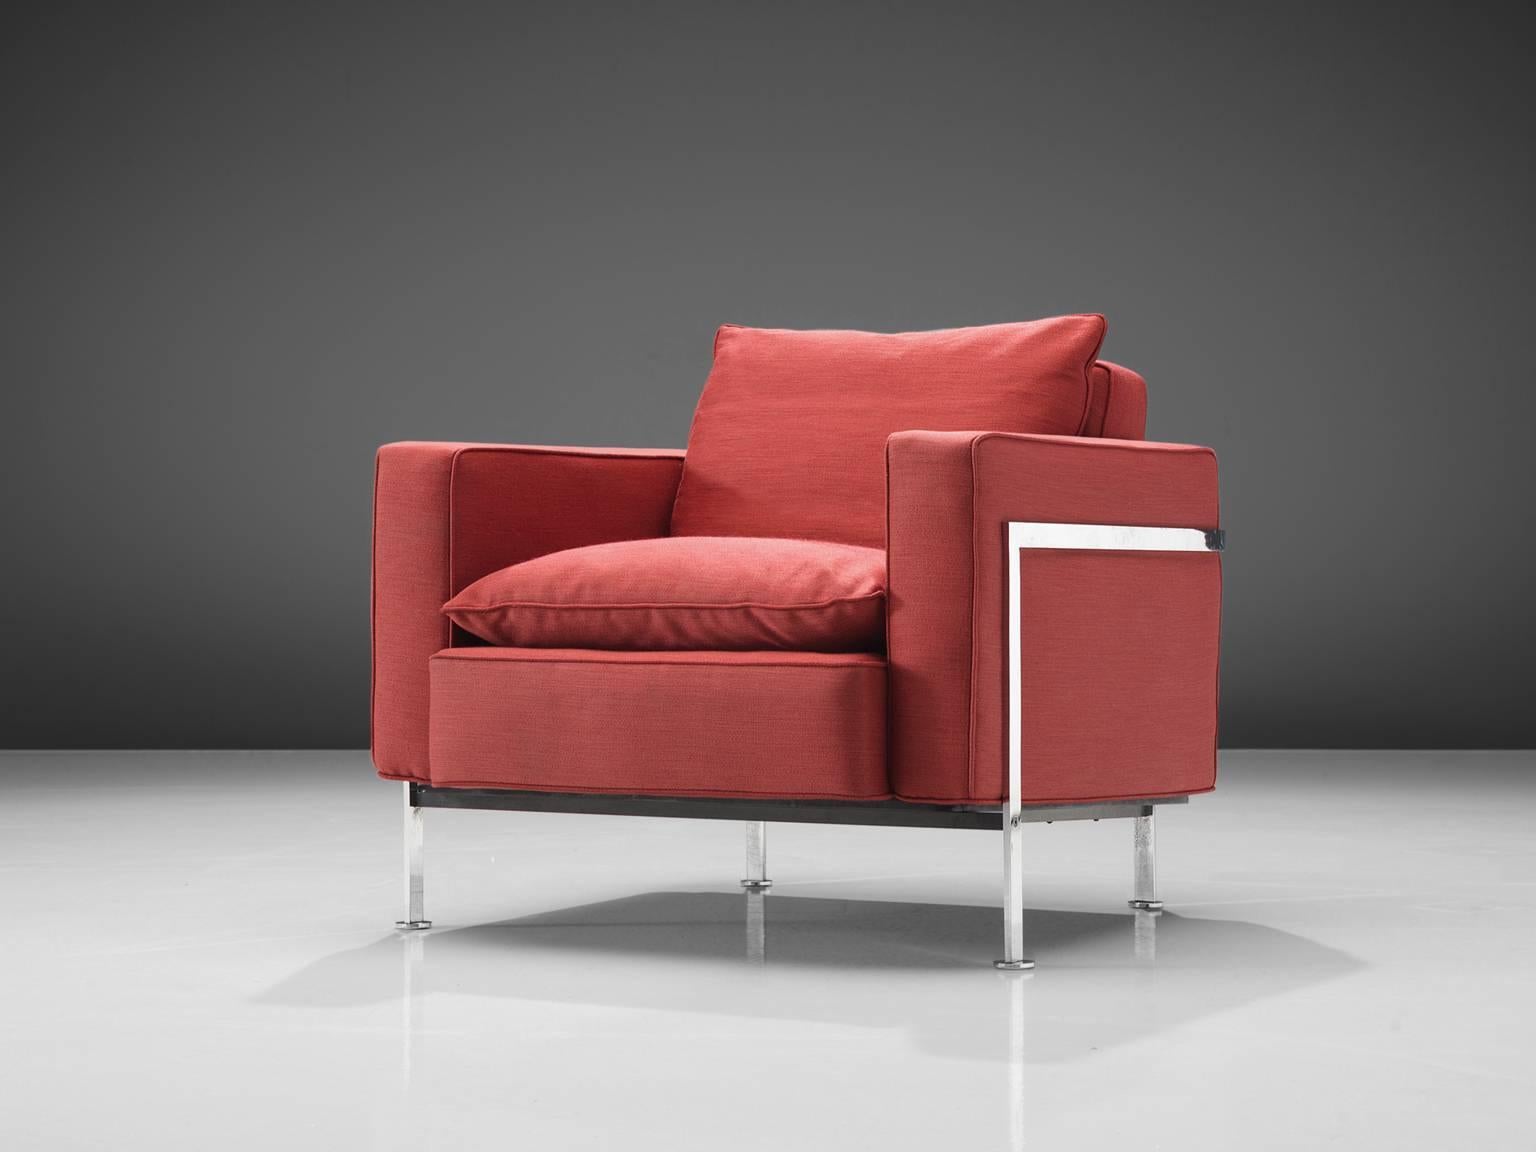 Robert Hausmann for Stendig, armchair in red fabric, steel, Switzerland, 1954.

This comfortable armchair is designed with a chromed iron frame that functions as a basket for the cushions on the inside. The thick back and seat cushion provide an